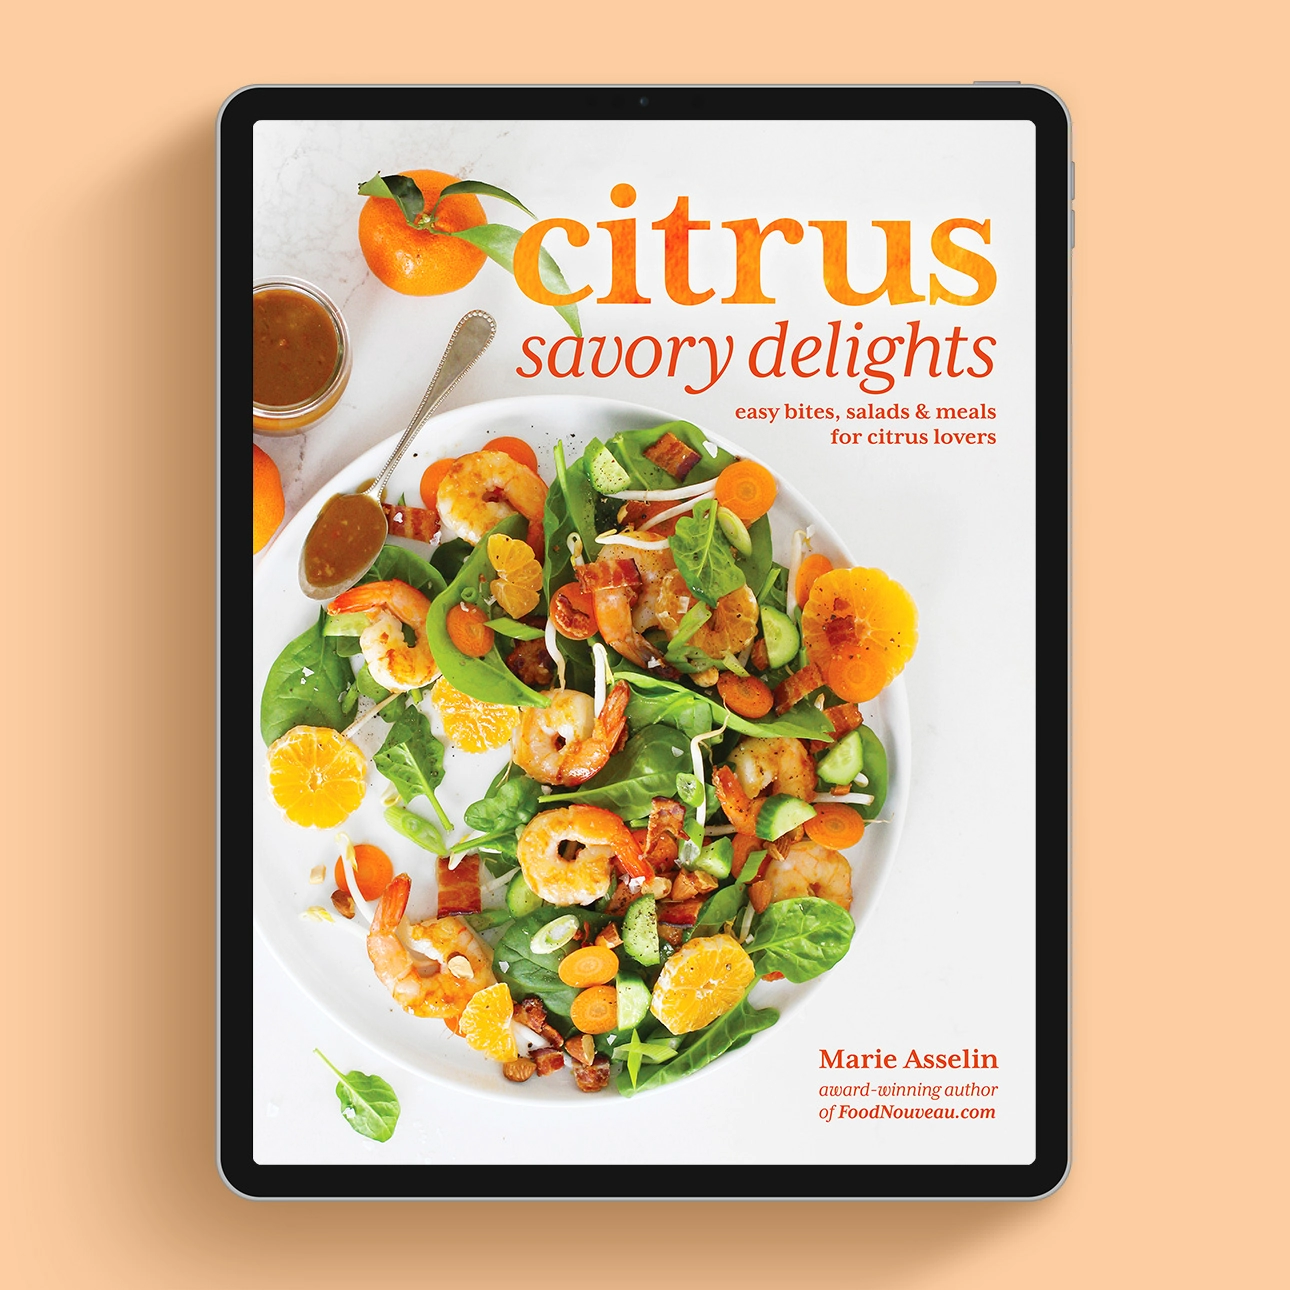 Citrus Savory Delights: Easy Bites, Salads, and Meals for Citrus Lovers, an eBook by award-winning author of FoodNouveau.com, Marie Asselin